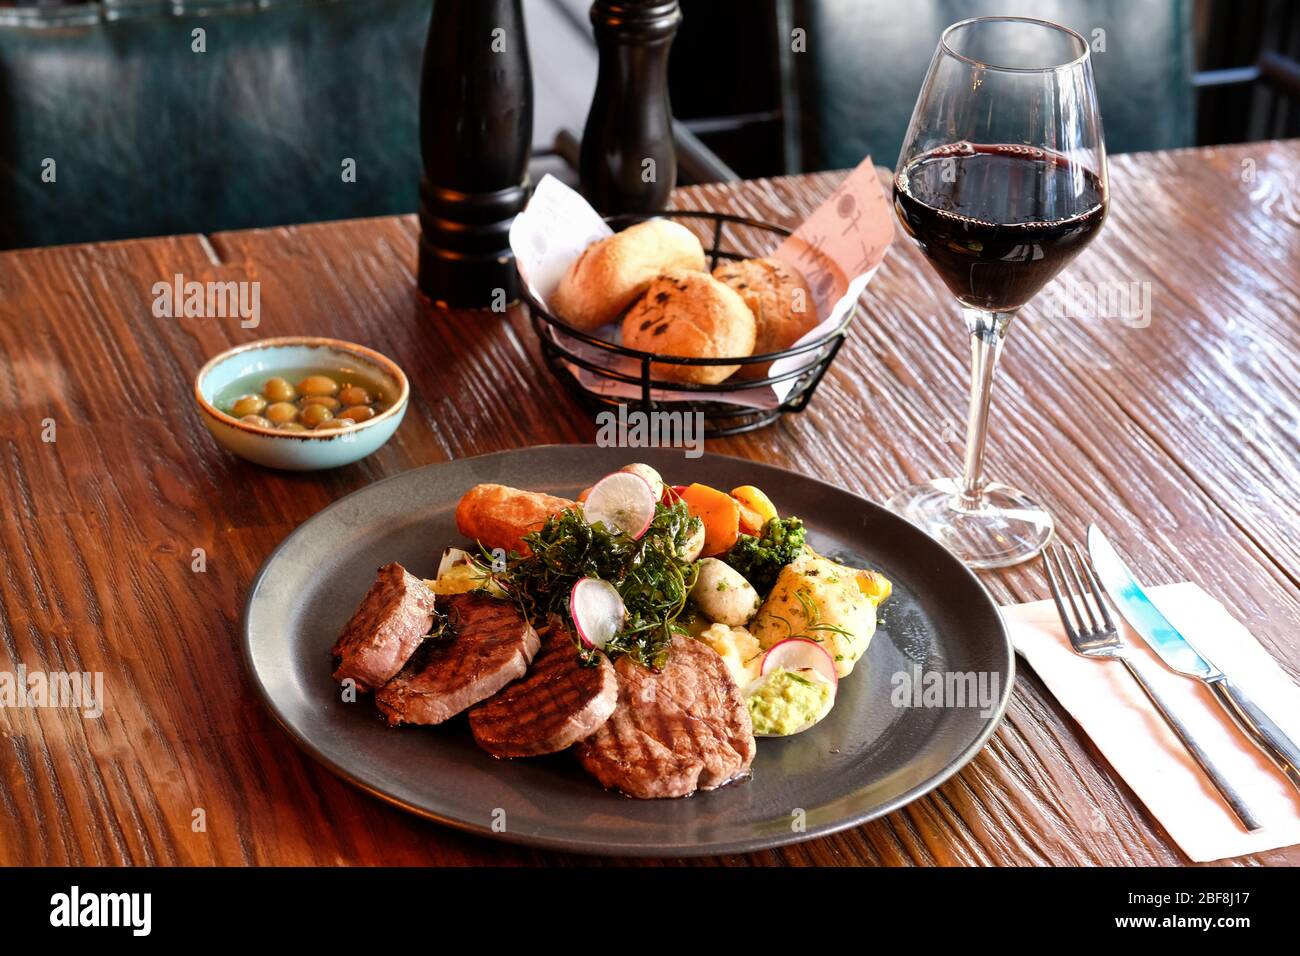 Specially crafted beef steak accompanied by red wine Stock Photo